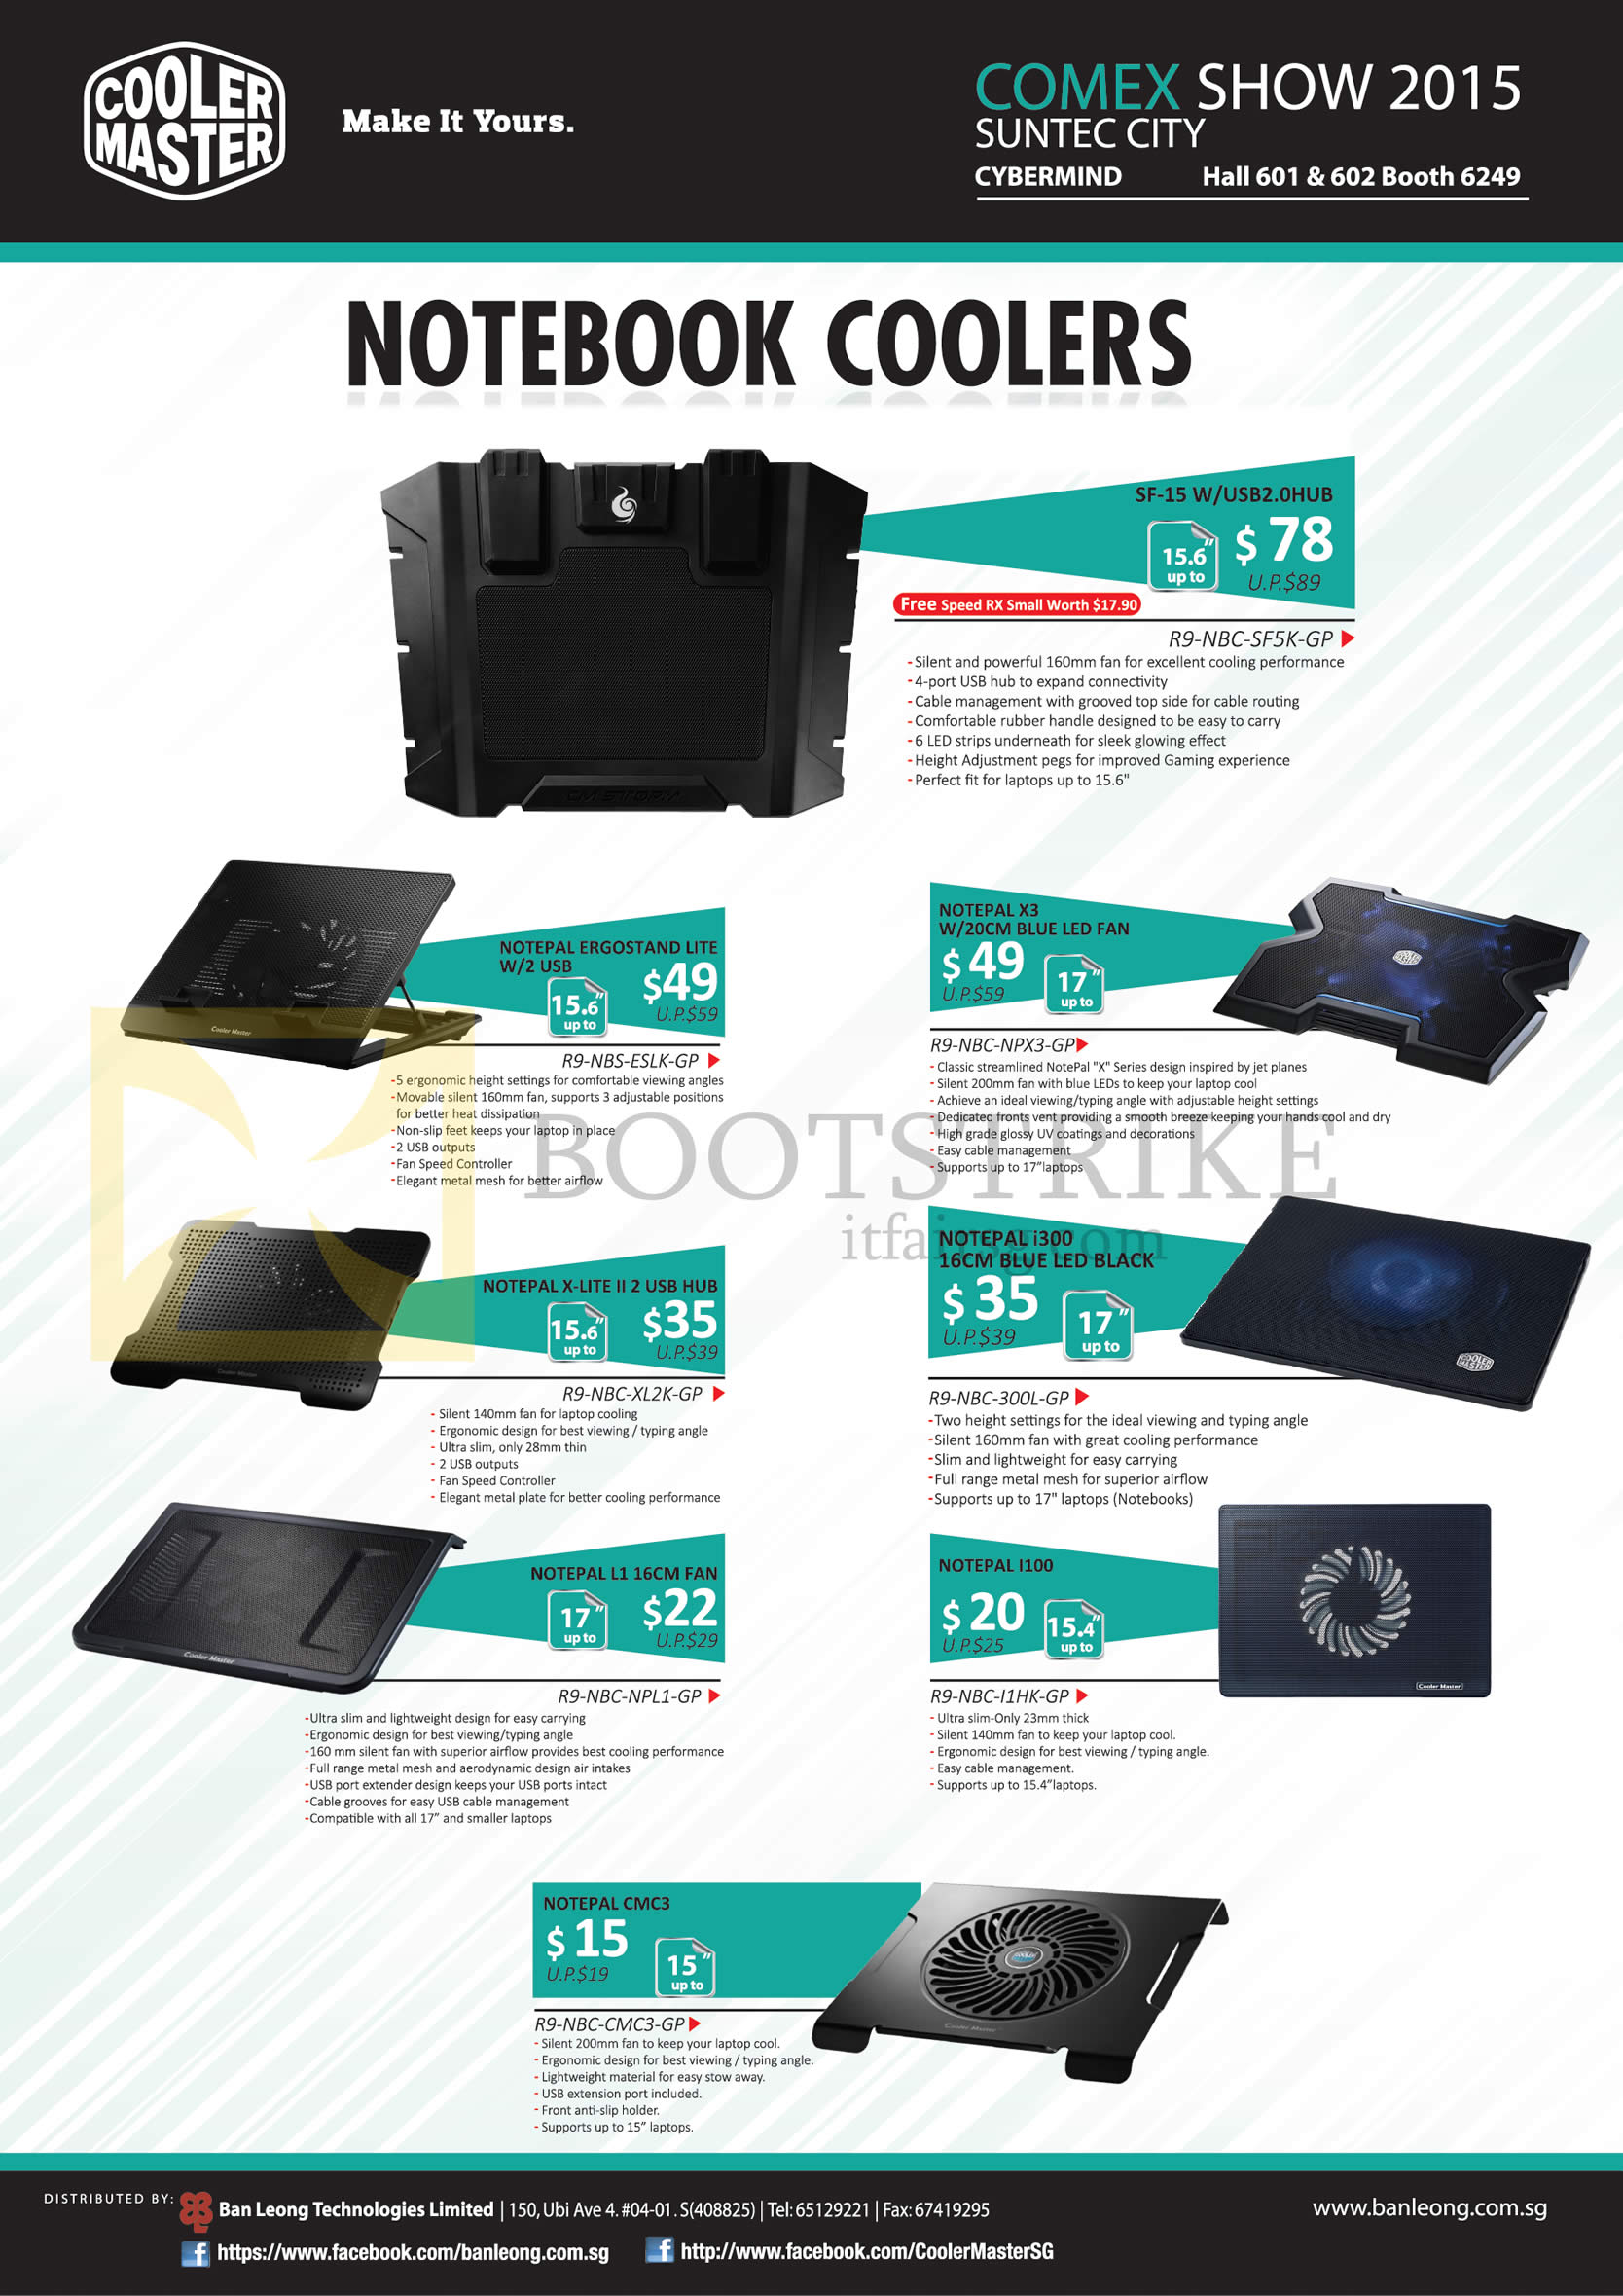 COMEX 2015 price list image brochure of Cooler Master Notebook Coolers SF-15 WUSB2.0HUB, Notepal Ergostand Lite, X3, X-Lite, I300, L1, L100, CMC3